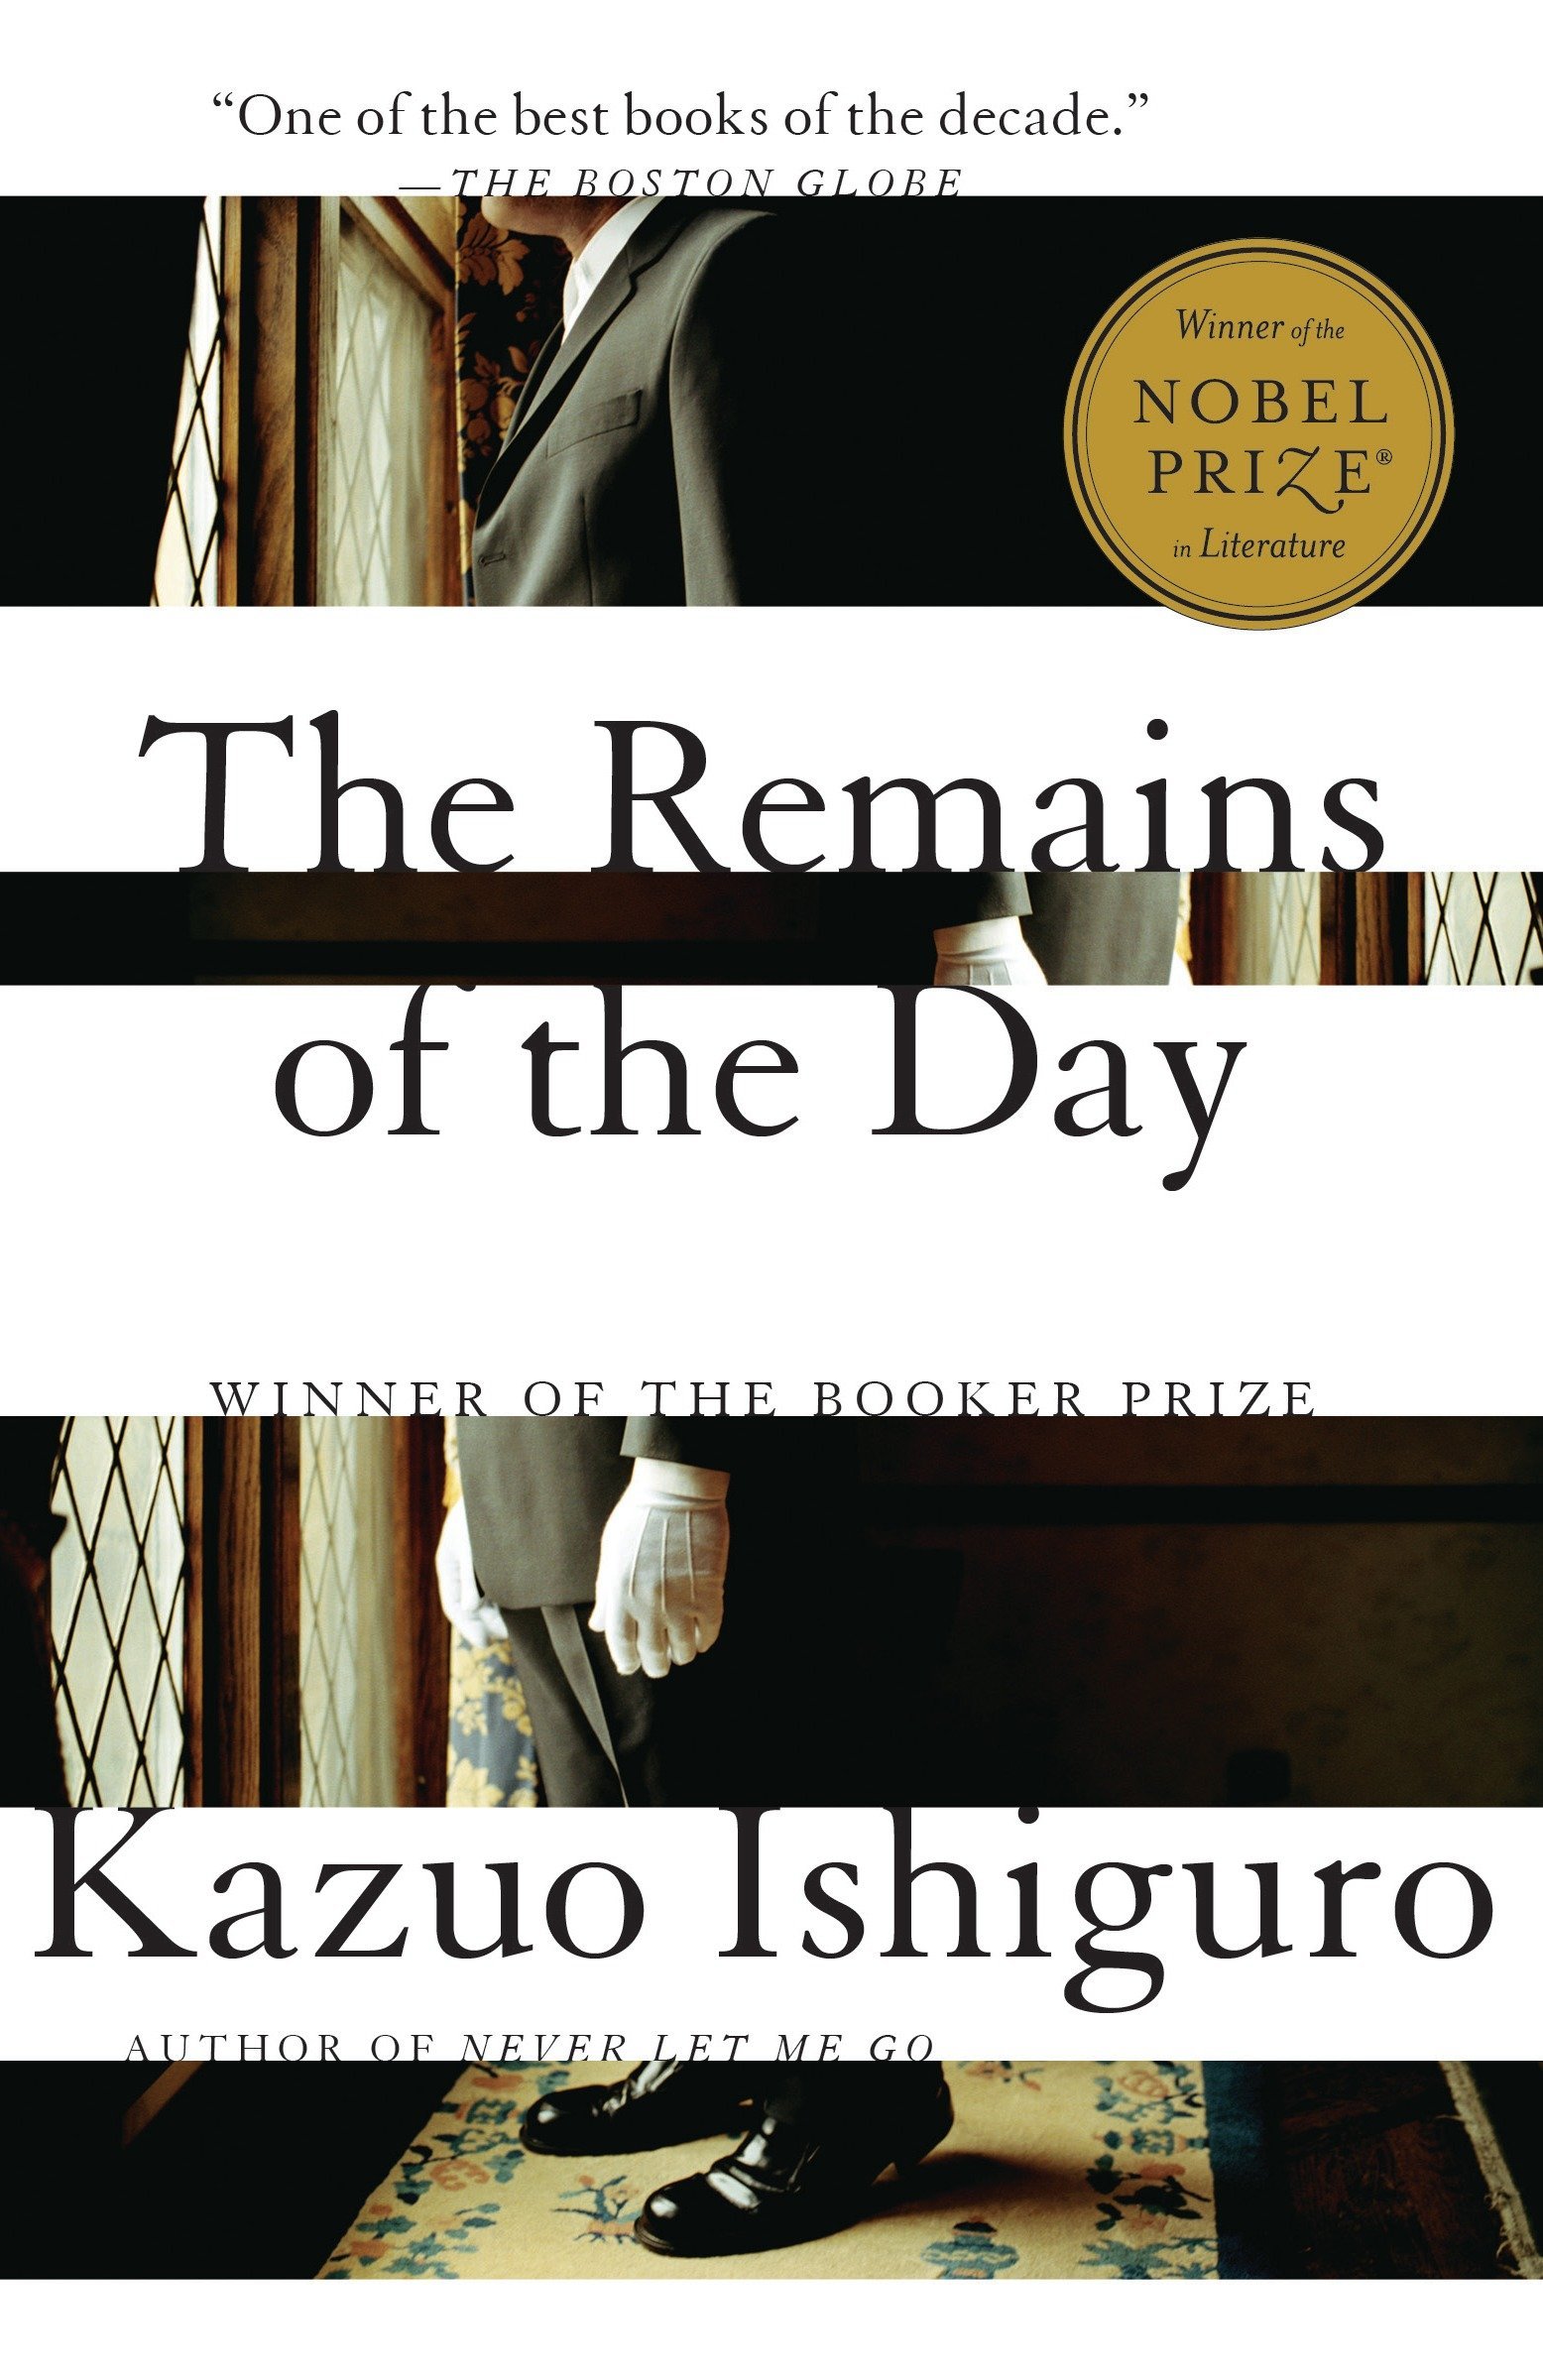 The Remains of the Day by Dazuo Ishiguro